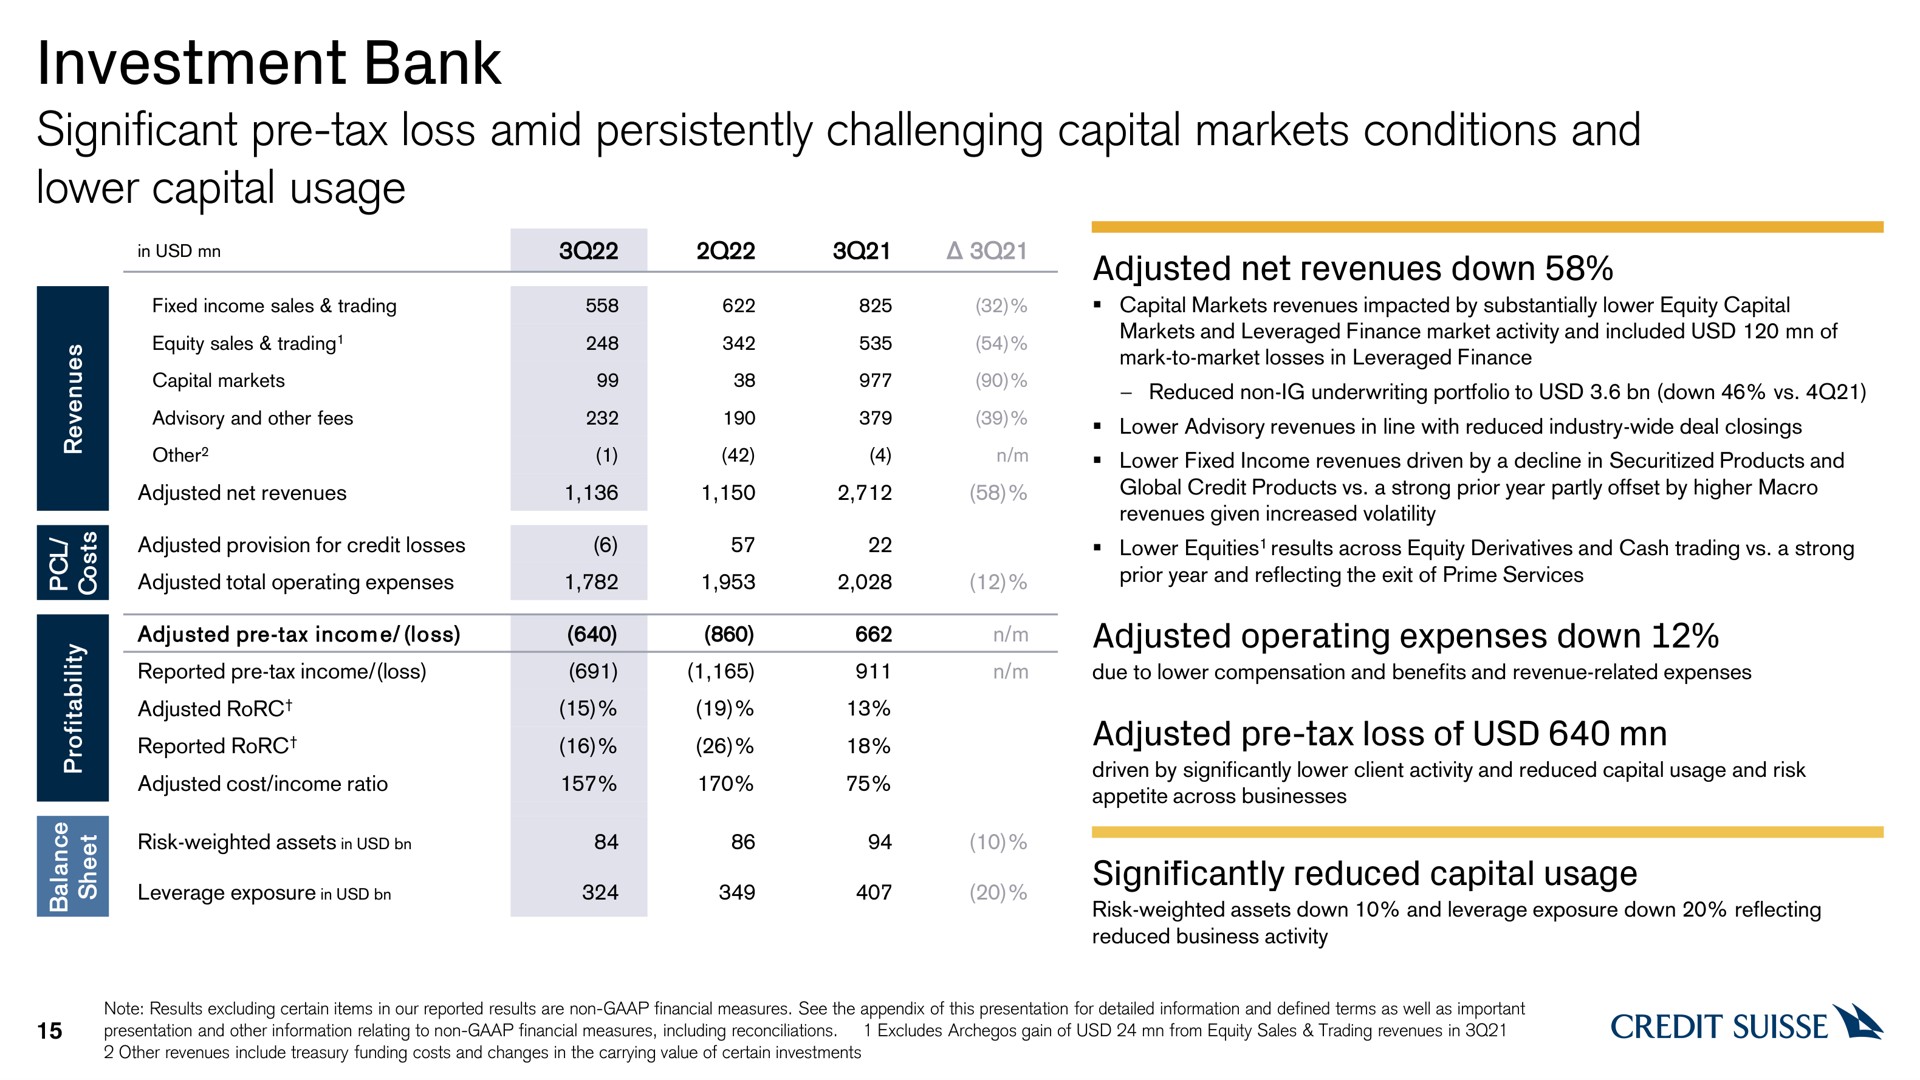 investment bank significant tax loss amid persistently challenging capital markets conditions and lower capital usage significantly reduced | Credit Suisse